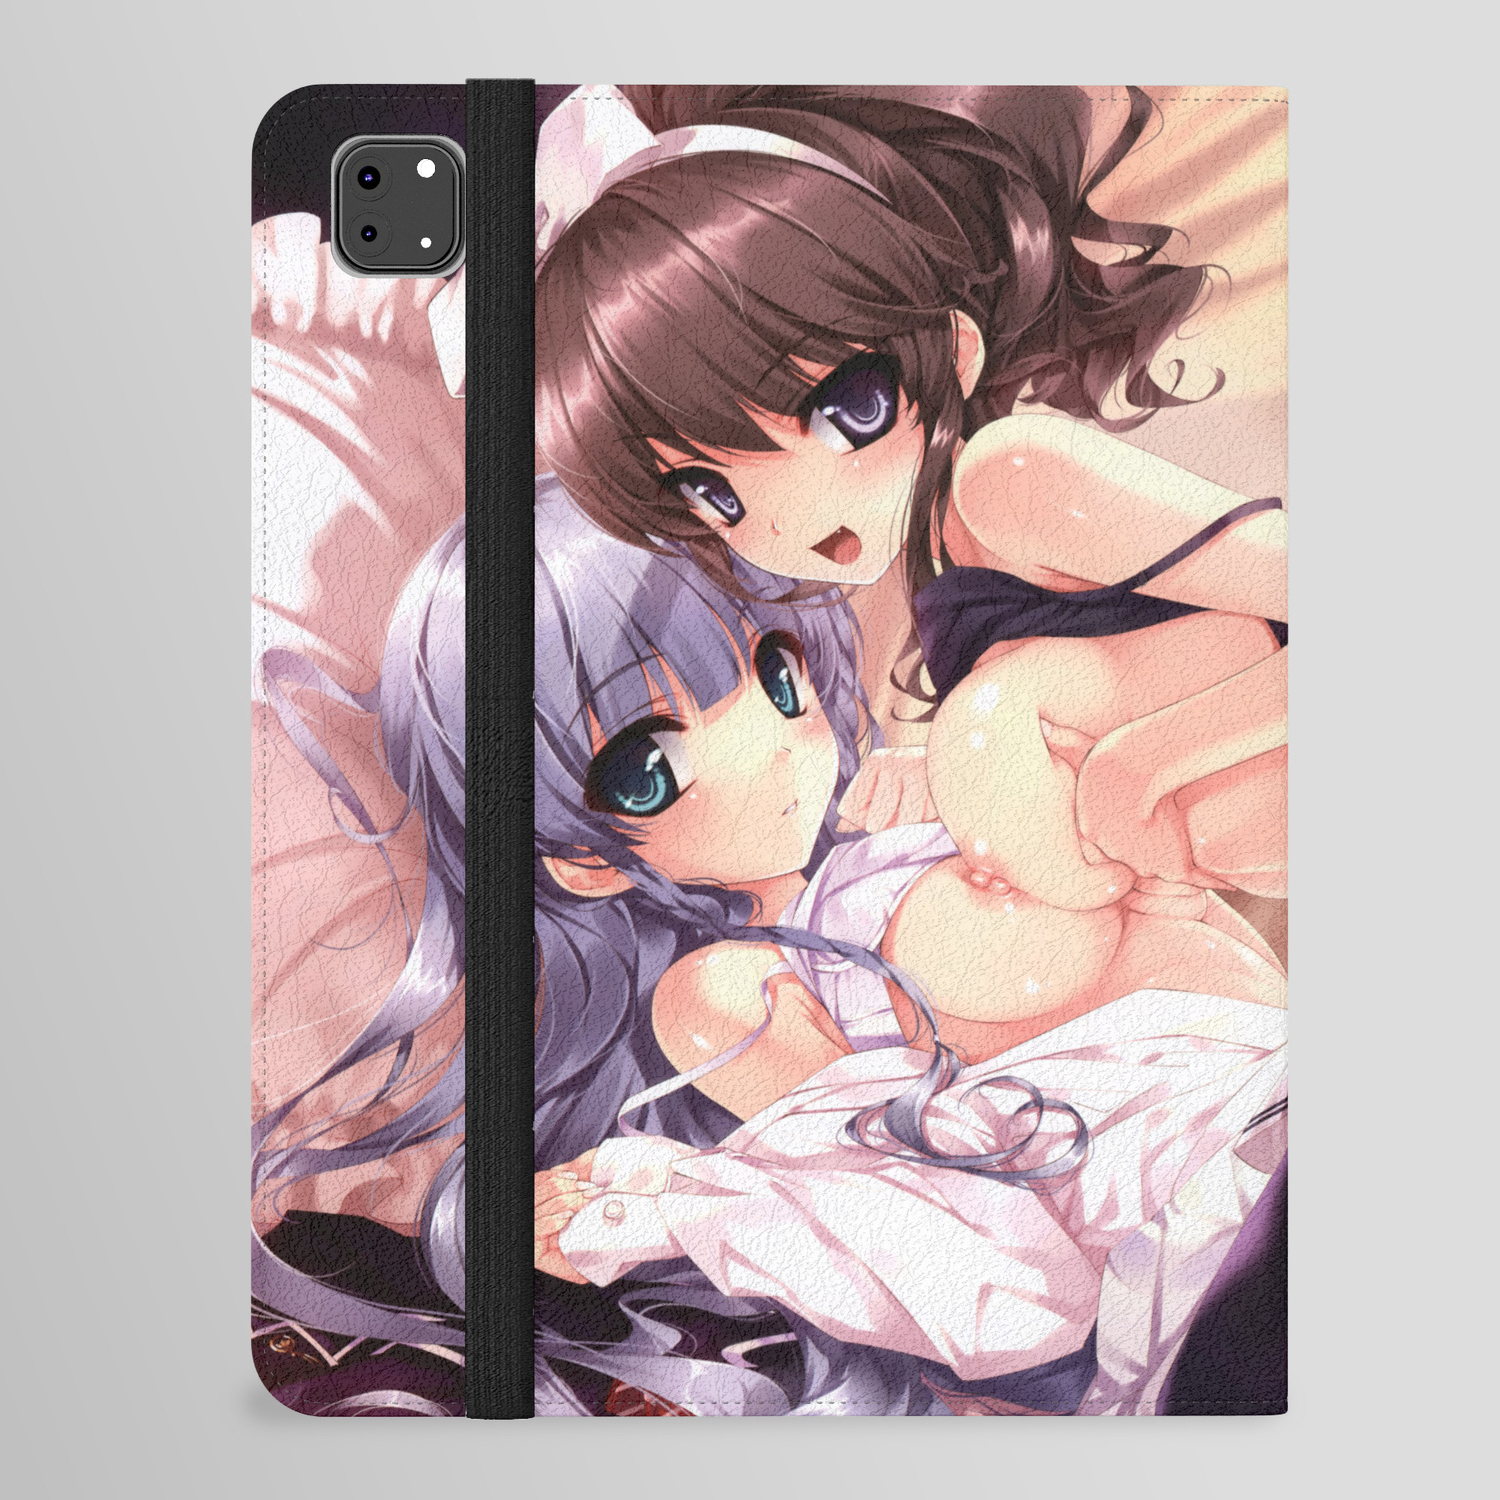 Anime girls in bed iPad Folio Case by all4you | Society6